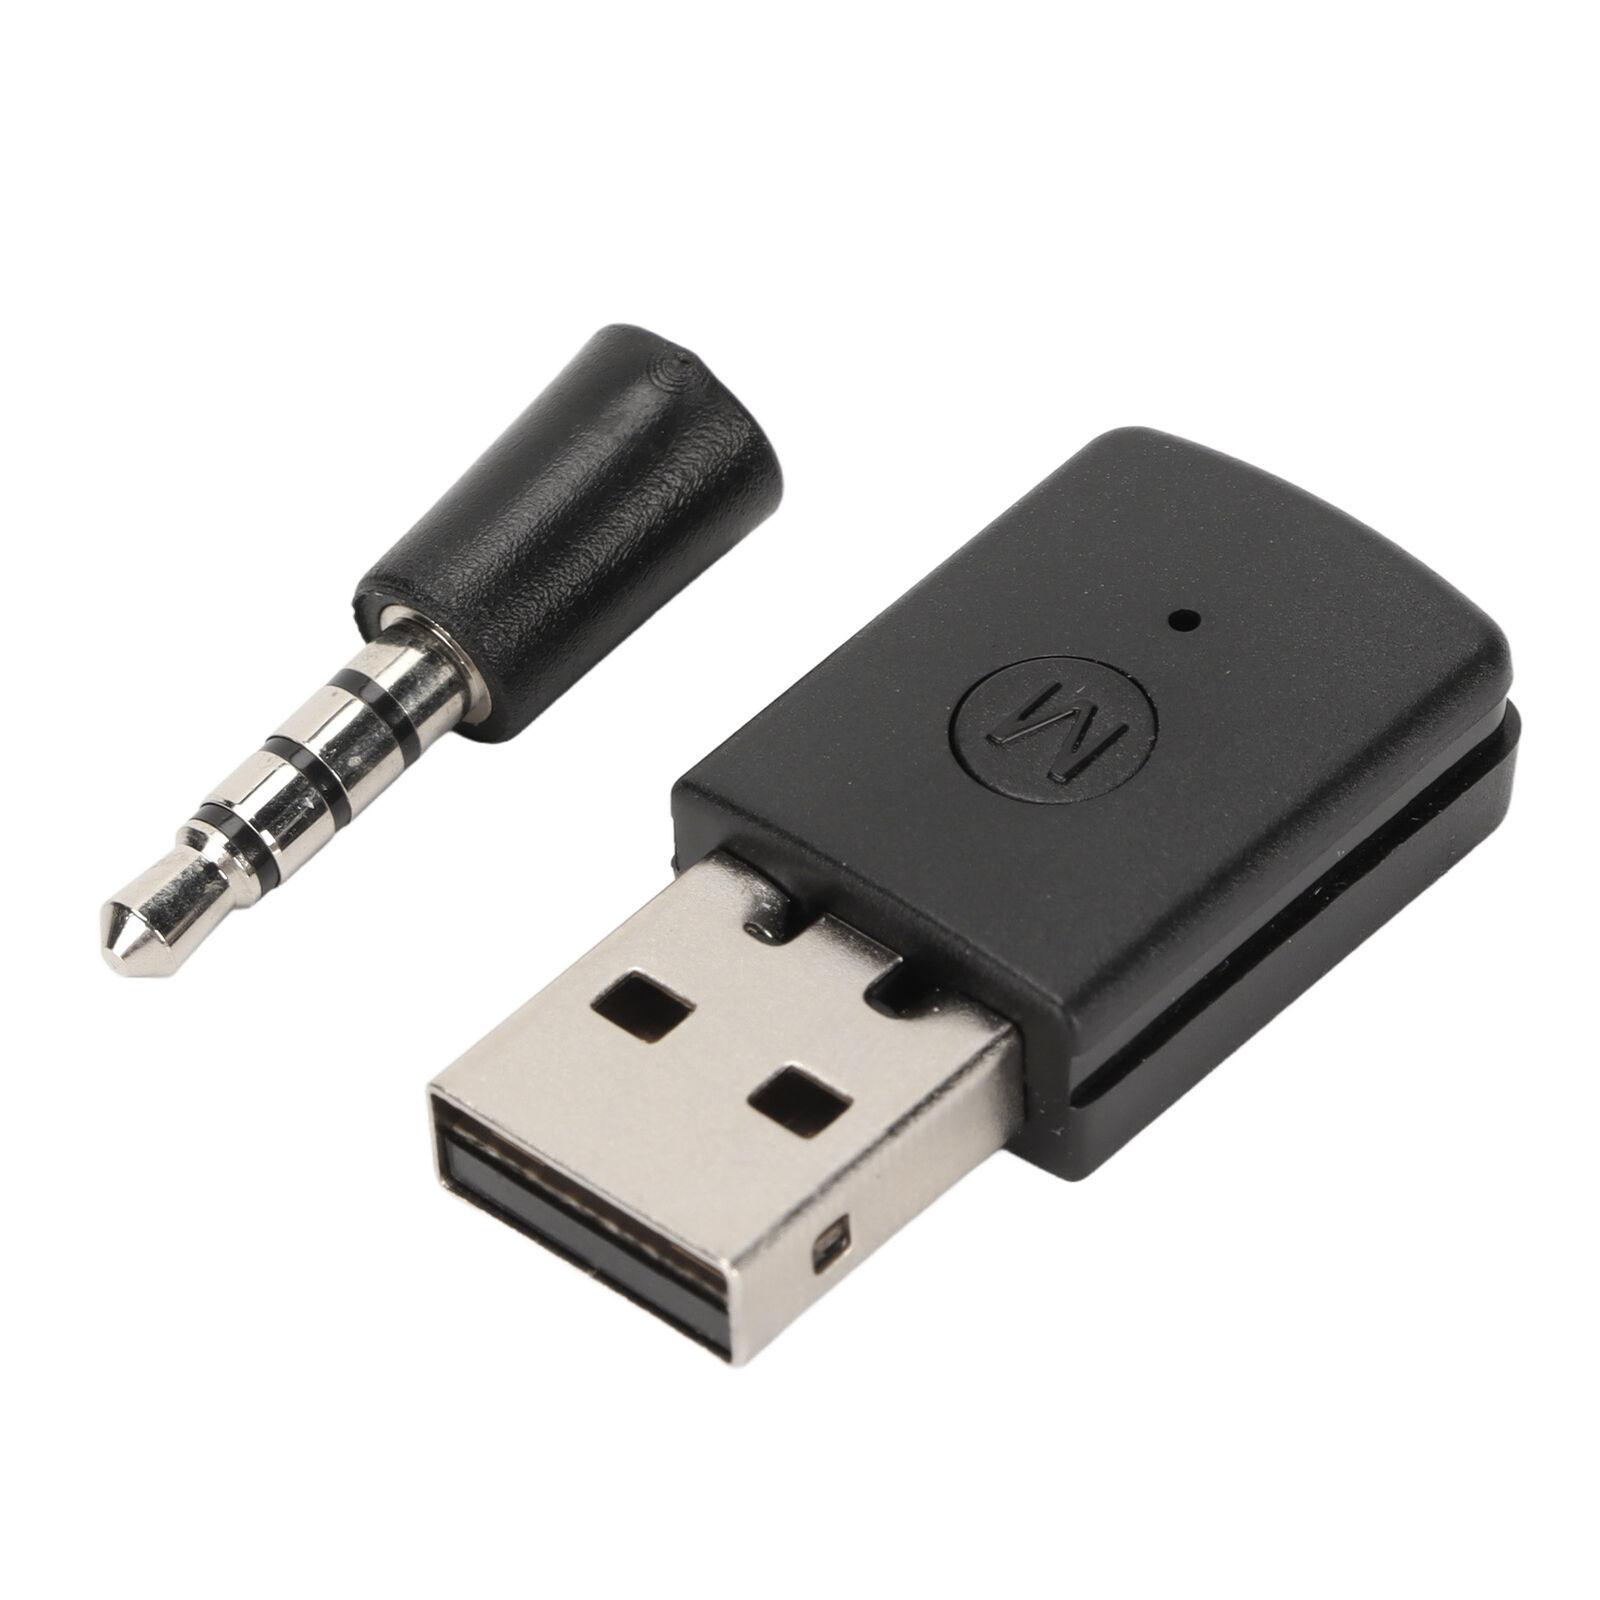 Wireless Adapter Noiseless Portable ABS 5.1 Adapter For